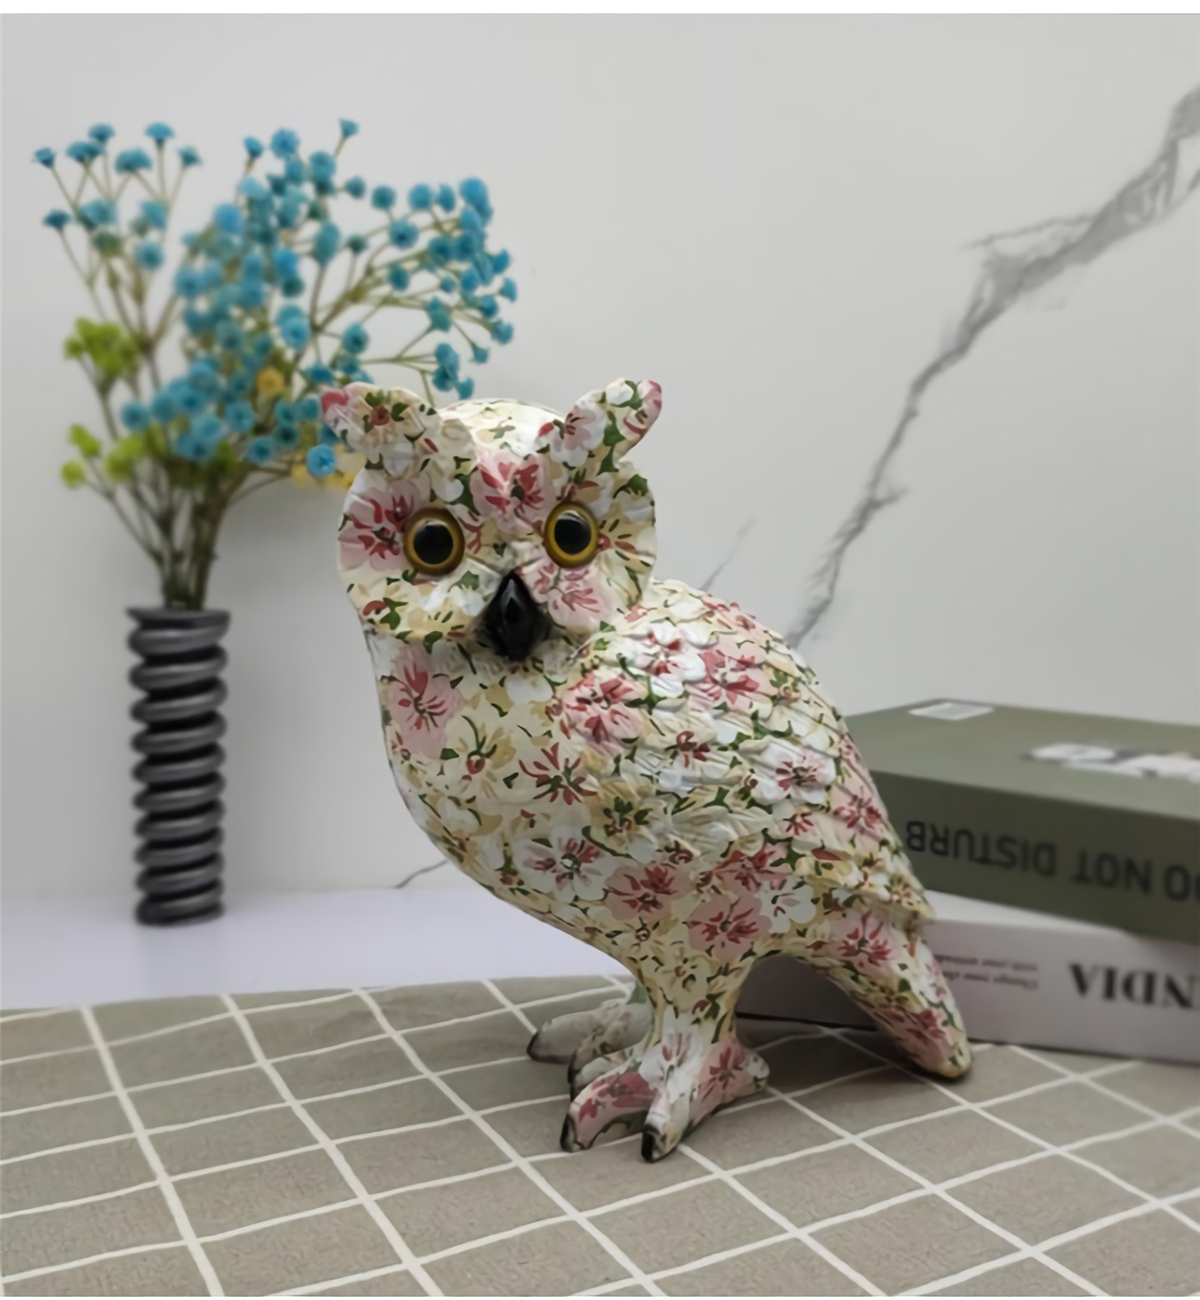 Colorful Owl Ornaments Creative Creative Art Animal Resin Crafts Home Office Desktop Decorations Accessories